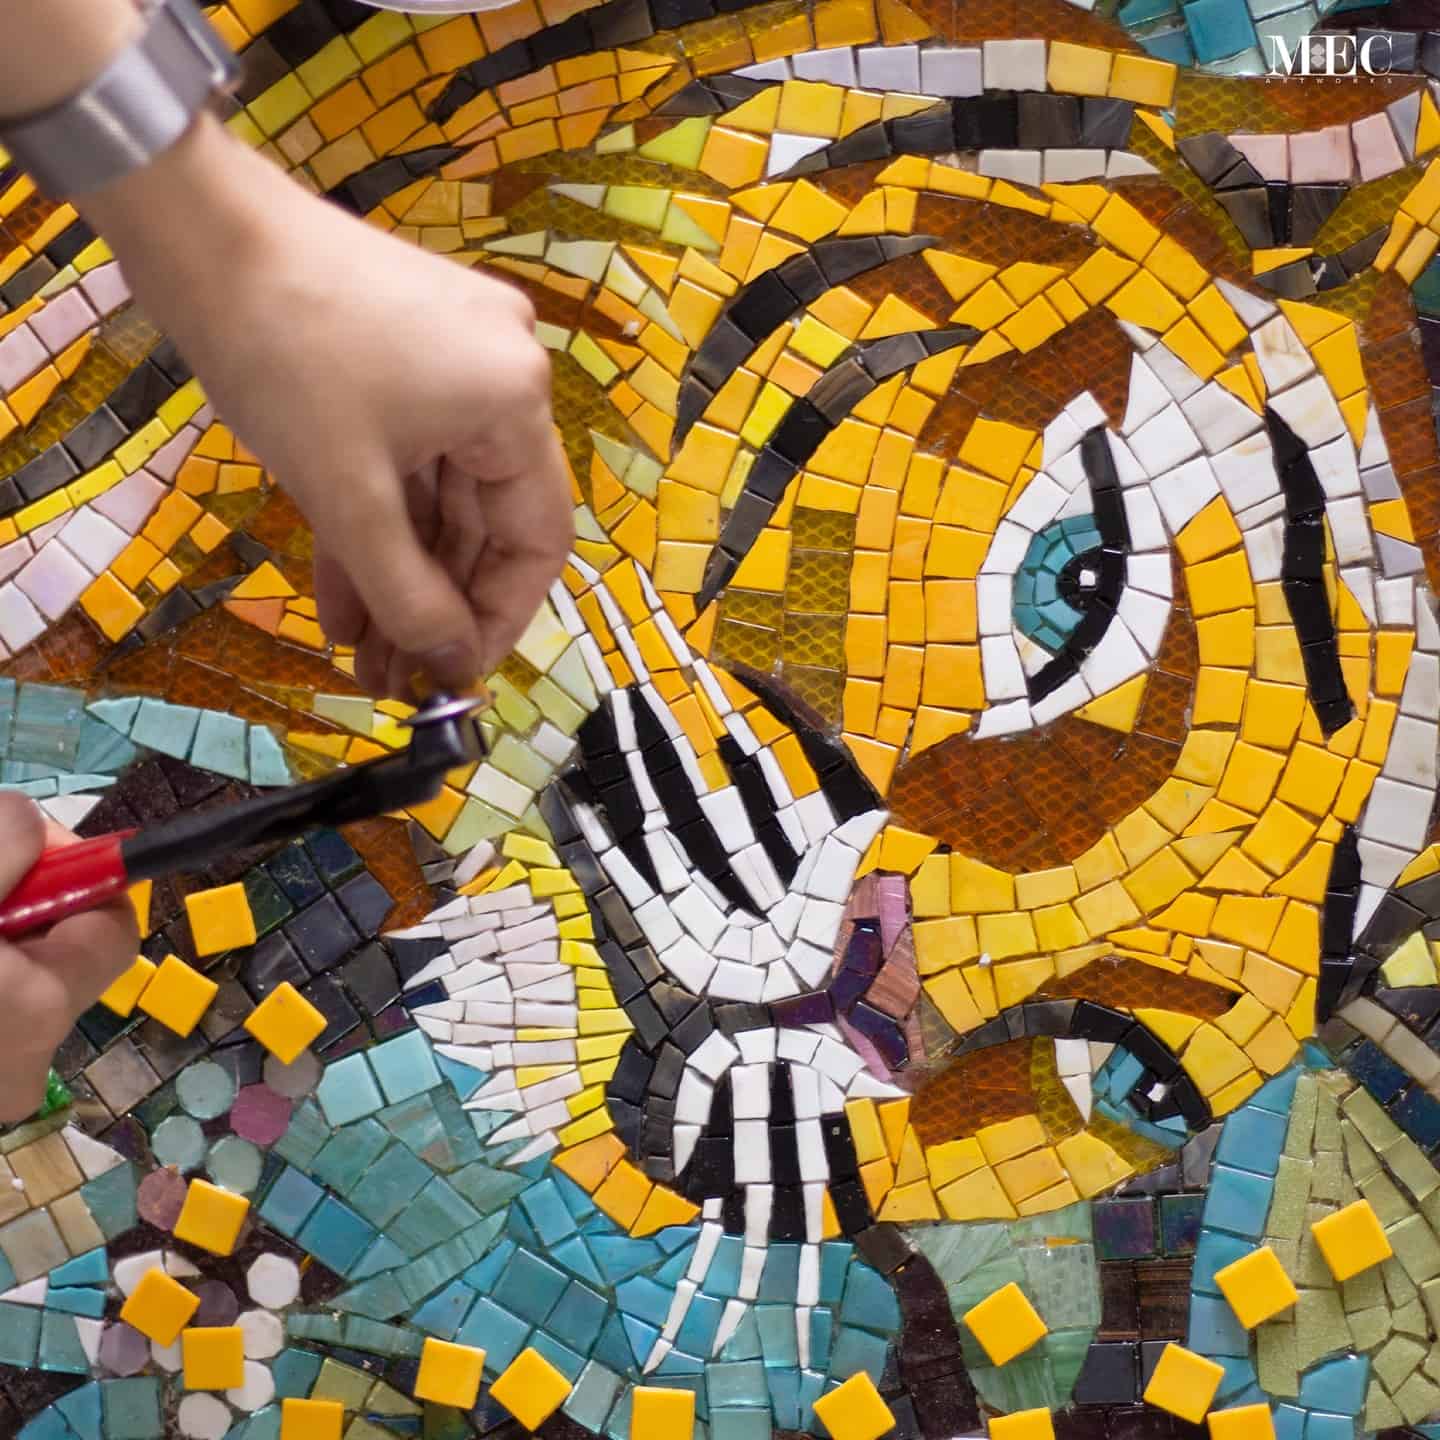 A close-up view of a mosaic artwork of a tiger's face, made of colorful tiles placed by hand with tweezers